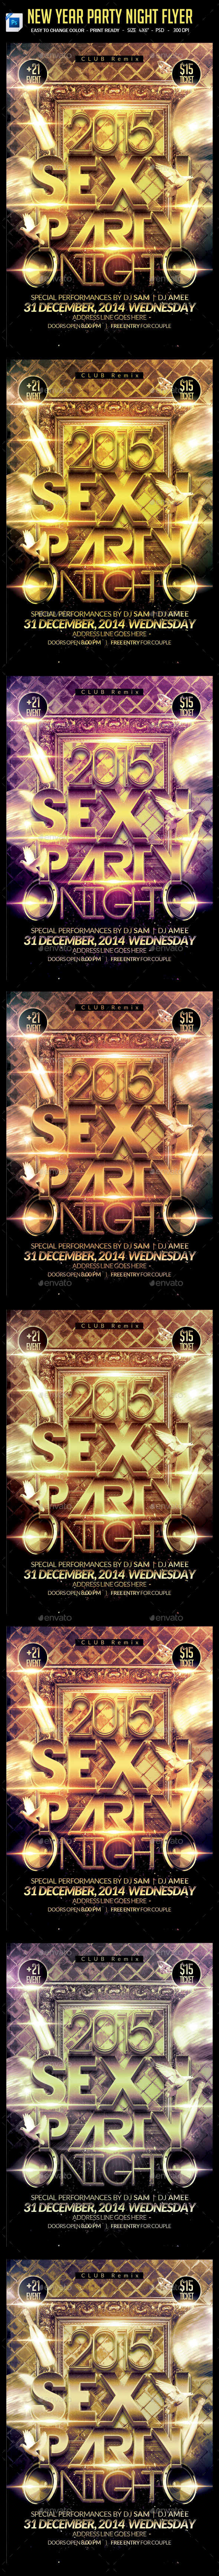 Sexy New Year Night Party Flyer